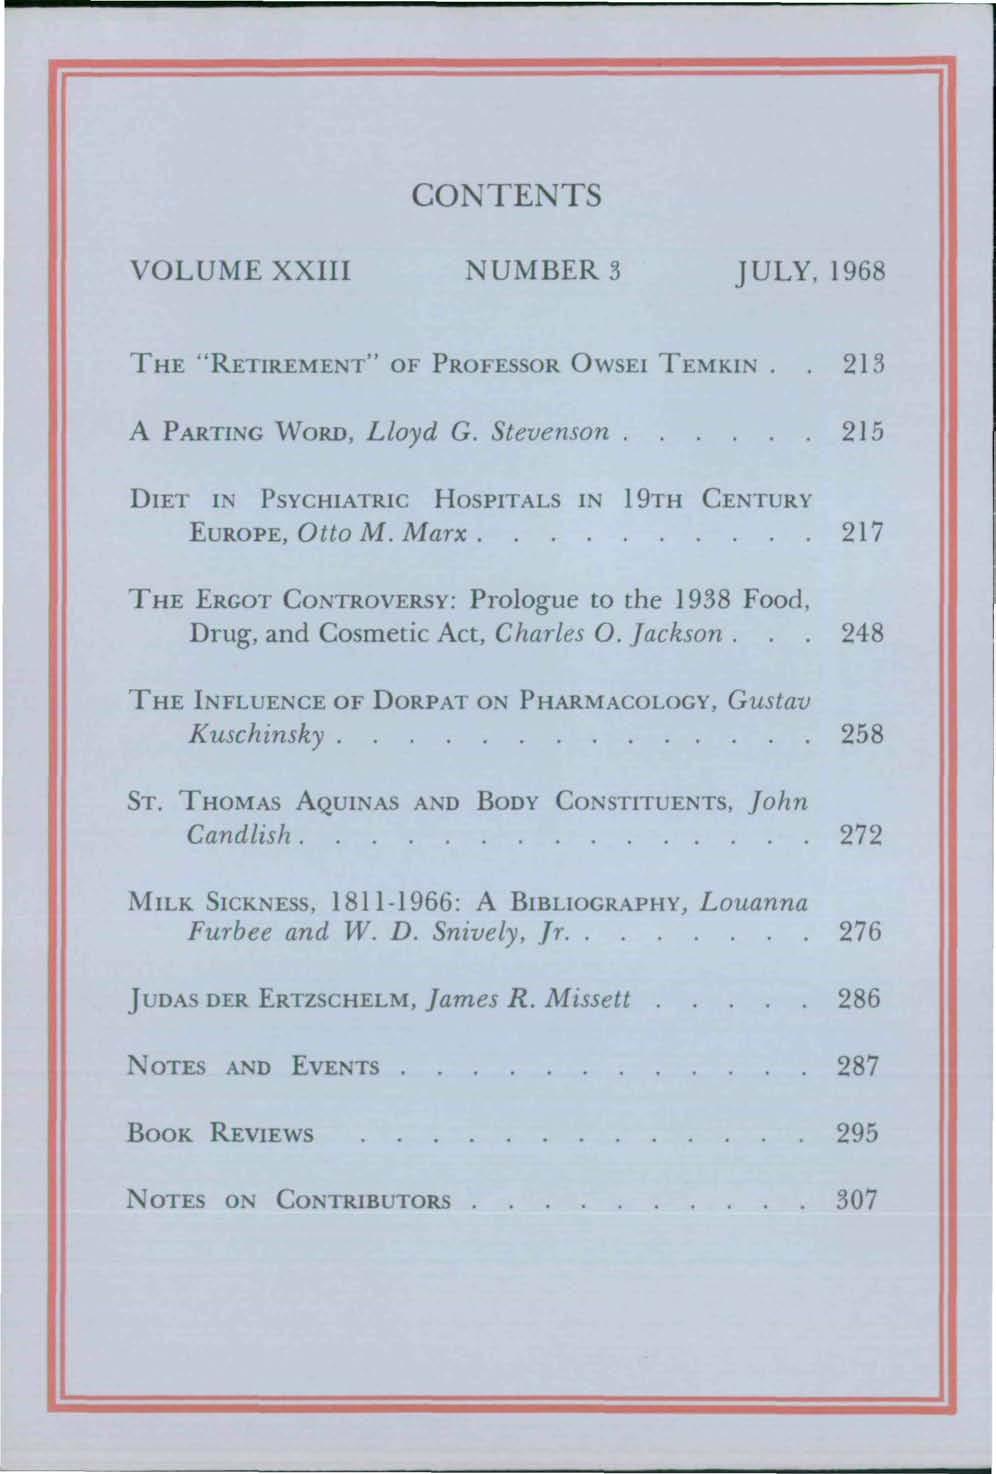 CONTENTS VOLUME XXIII NUMBER 3 JULY, 1968 THE "RETIREMENT" OF PROFESSOR OWSEI TEMKIN.. 213 A PARTING WORD, Lloyd G. Stevenson 215 DIET IN PSYCHIATRIC HOSPITALS IN 19TH CENTURY EUROPE, Otto M.